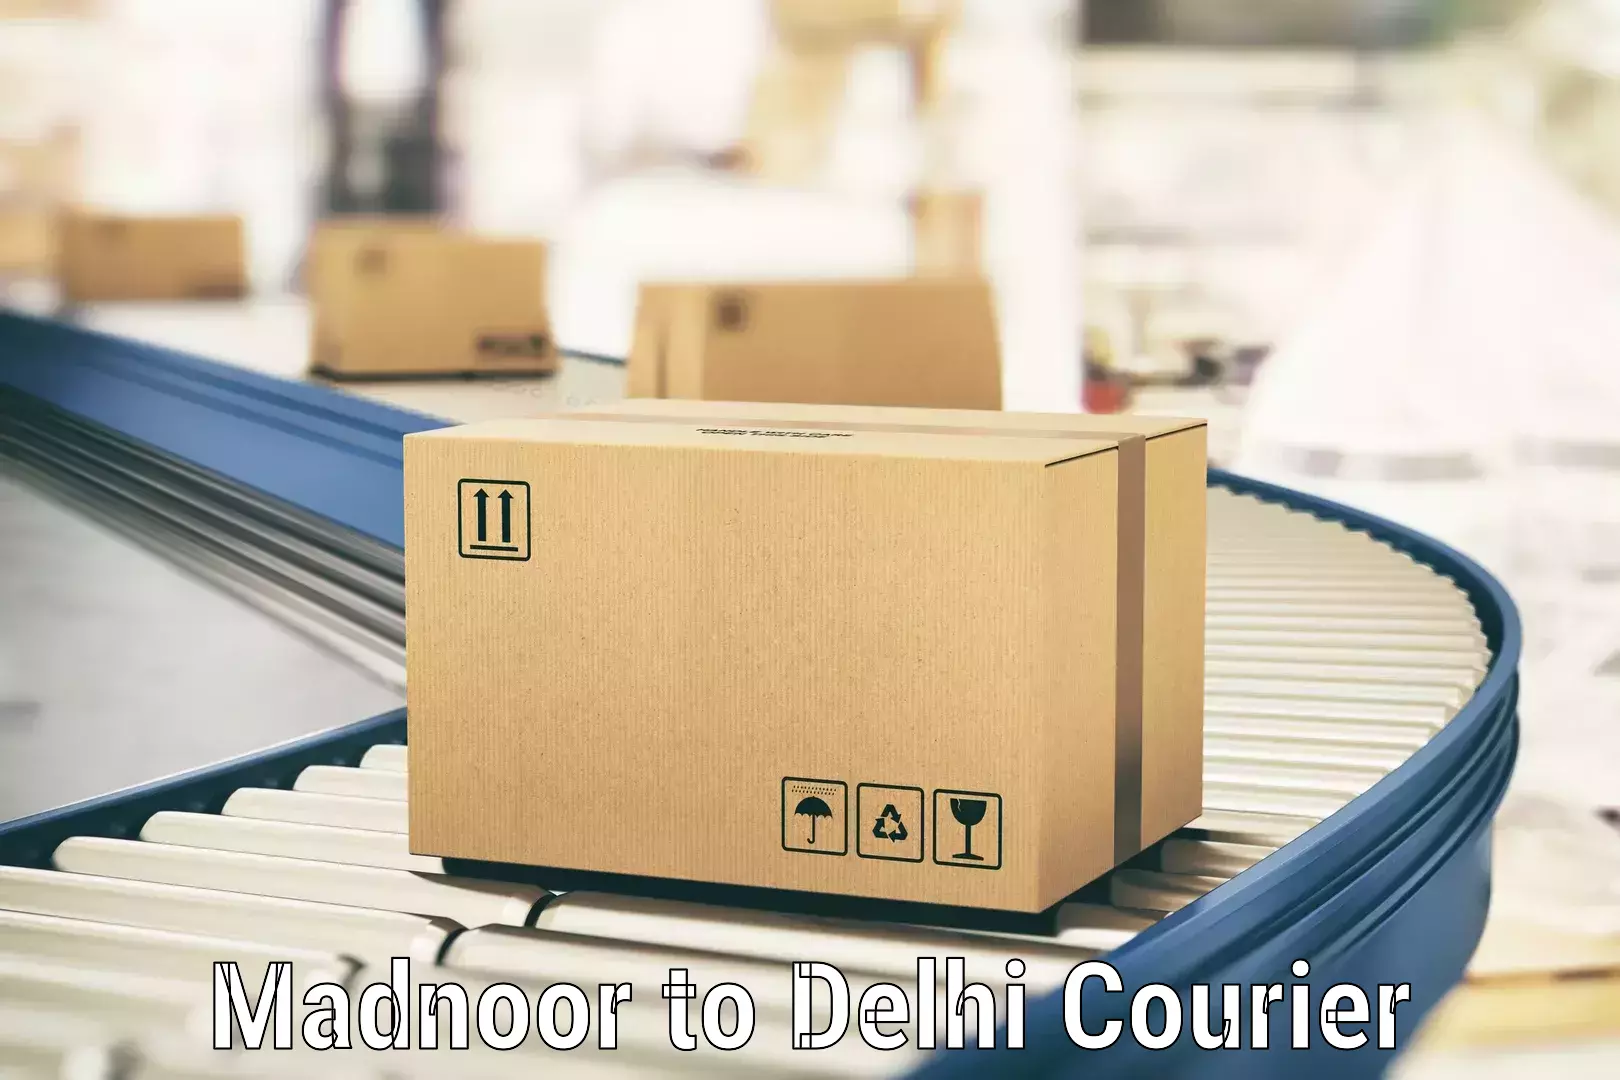 Pharmaceutical courier Madnoor to Subhash Nagar